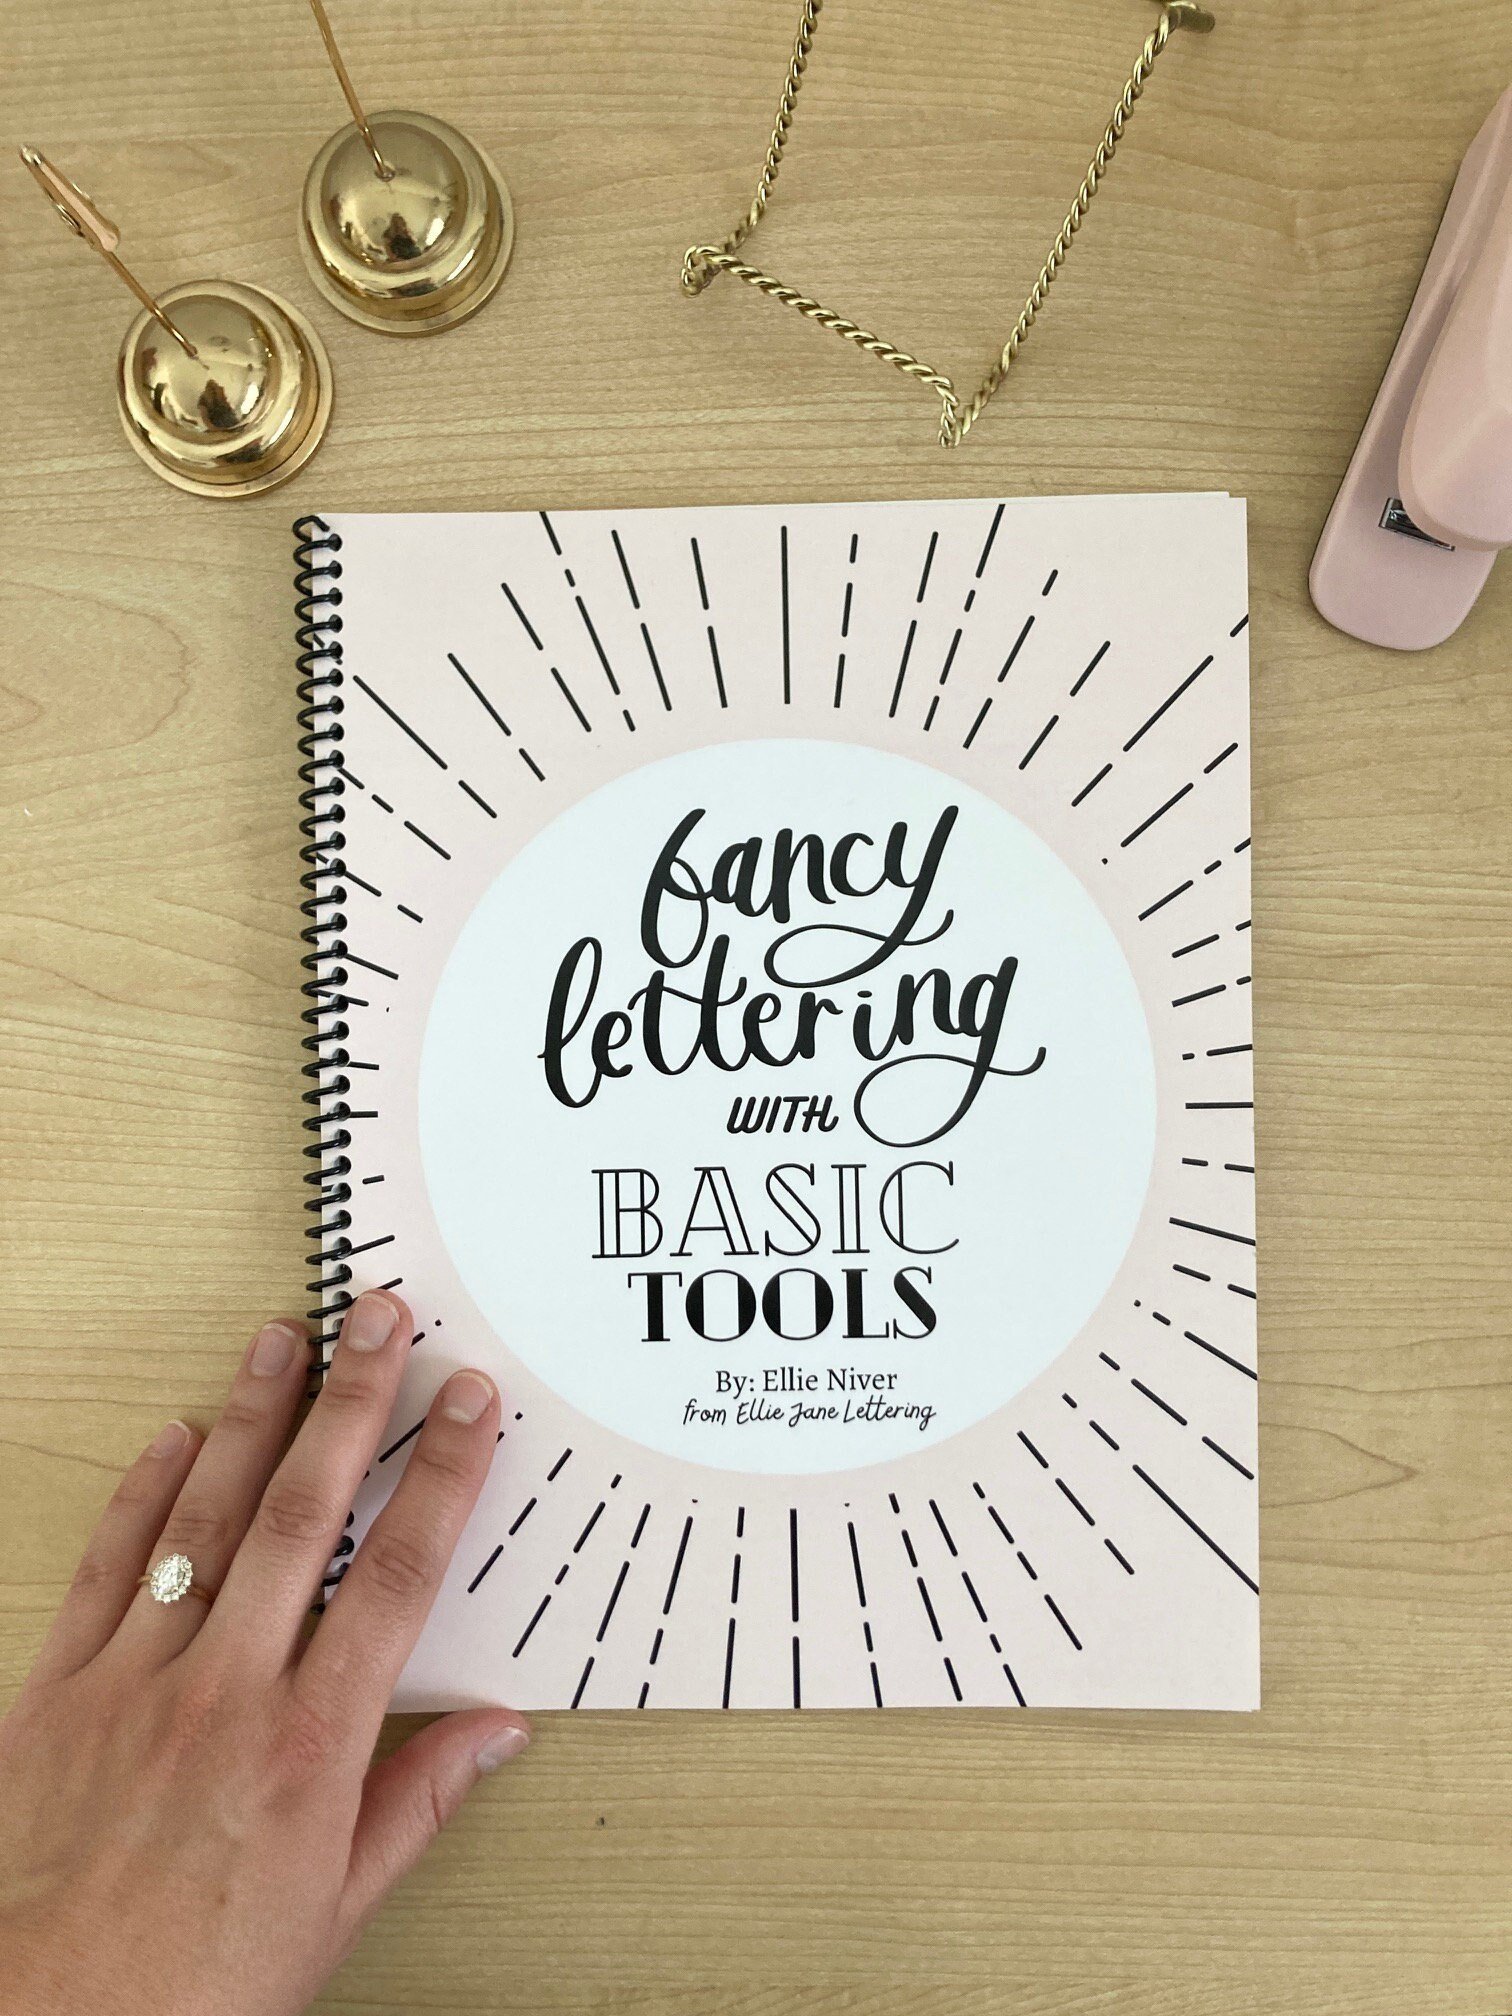 BUNDLE of 5 Lettering Workbooks with 180 Hand Lettering Practice